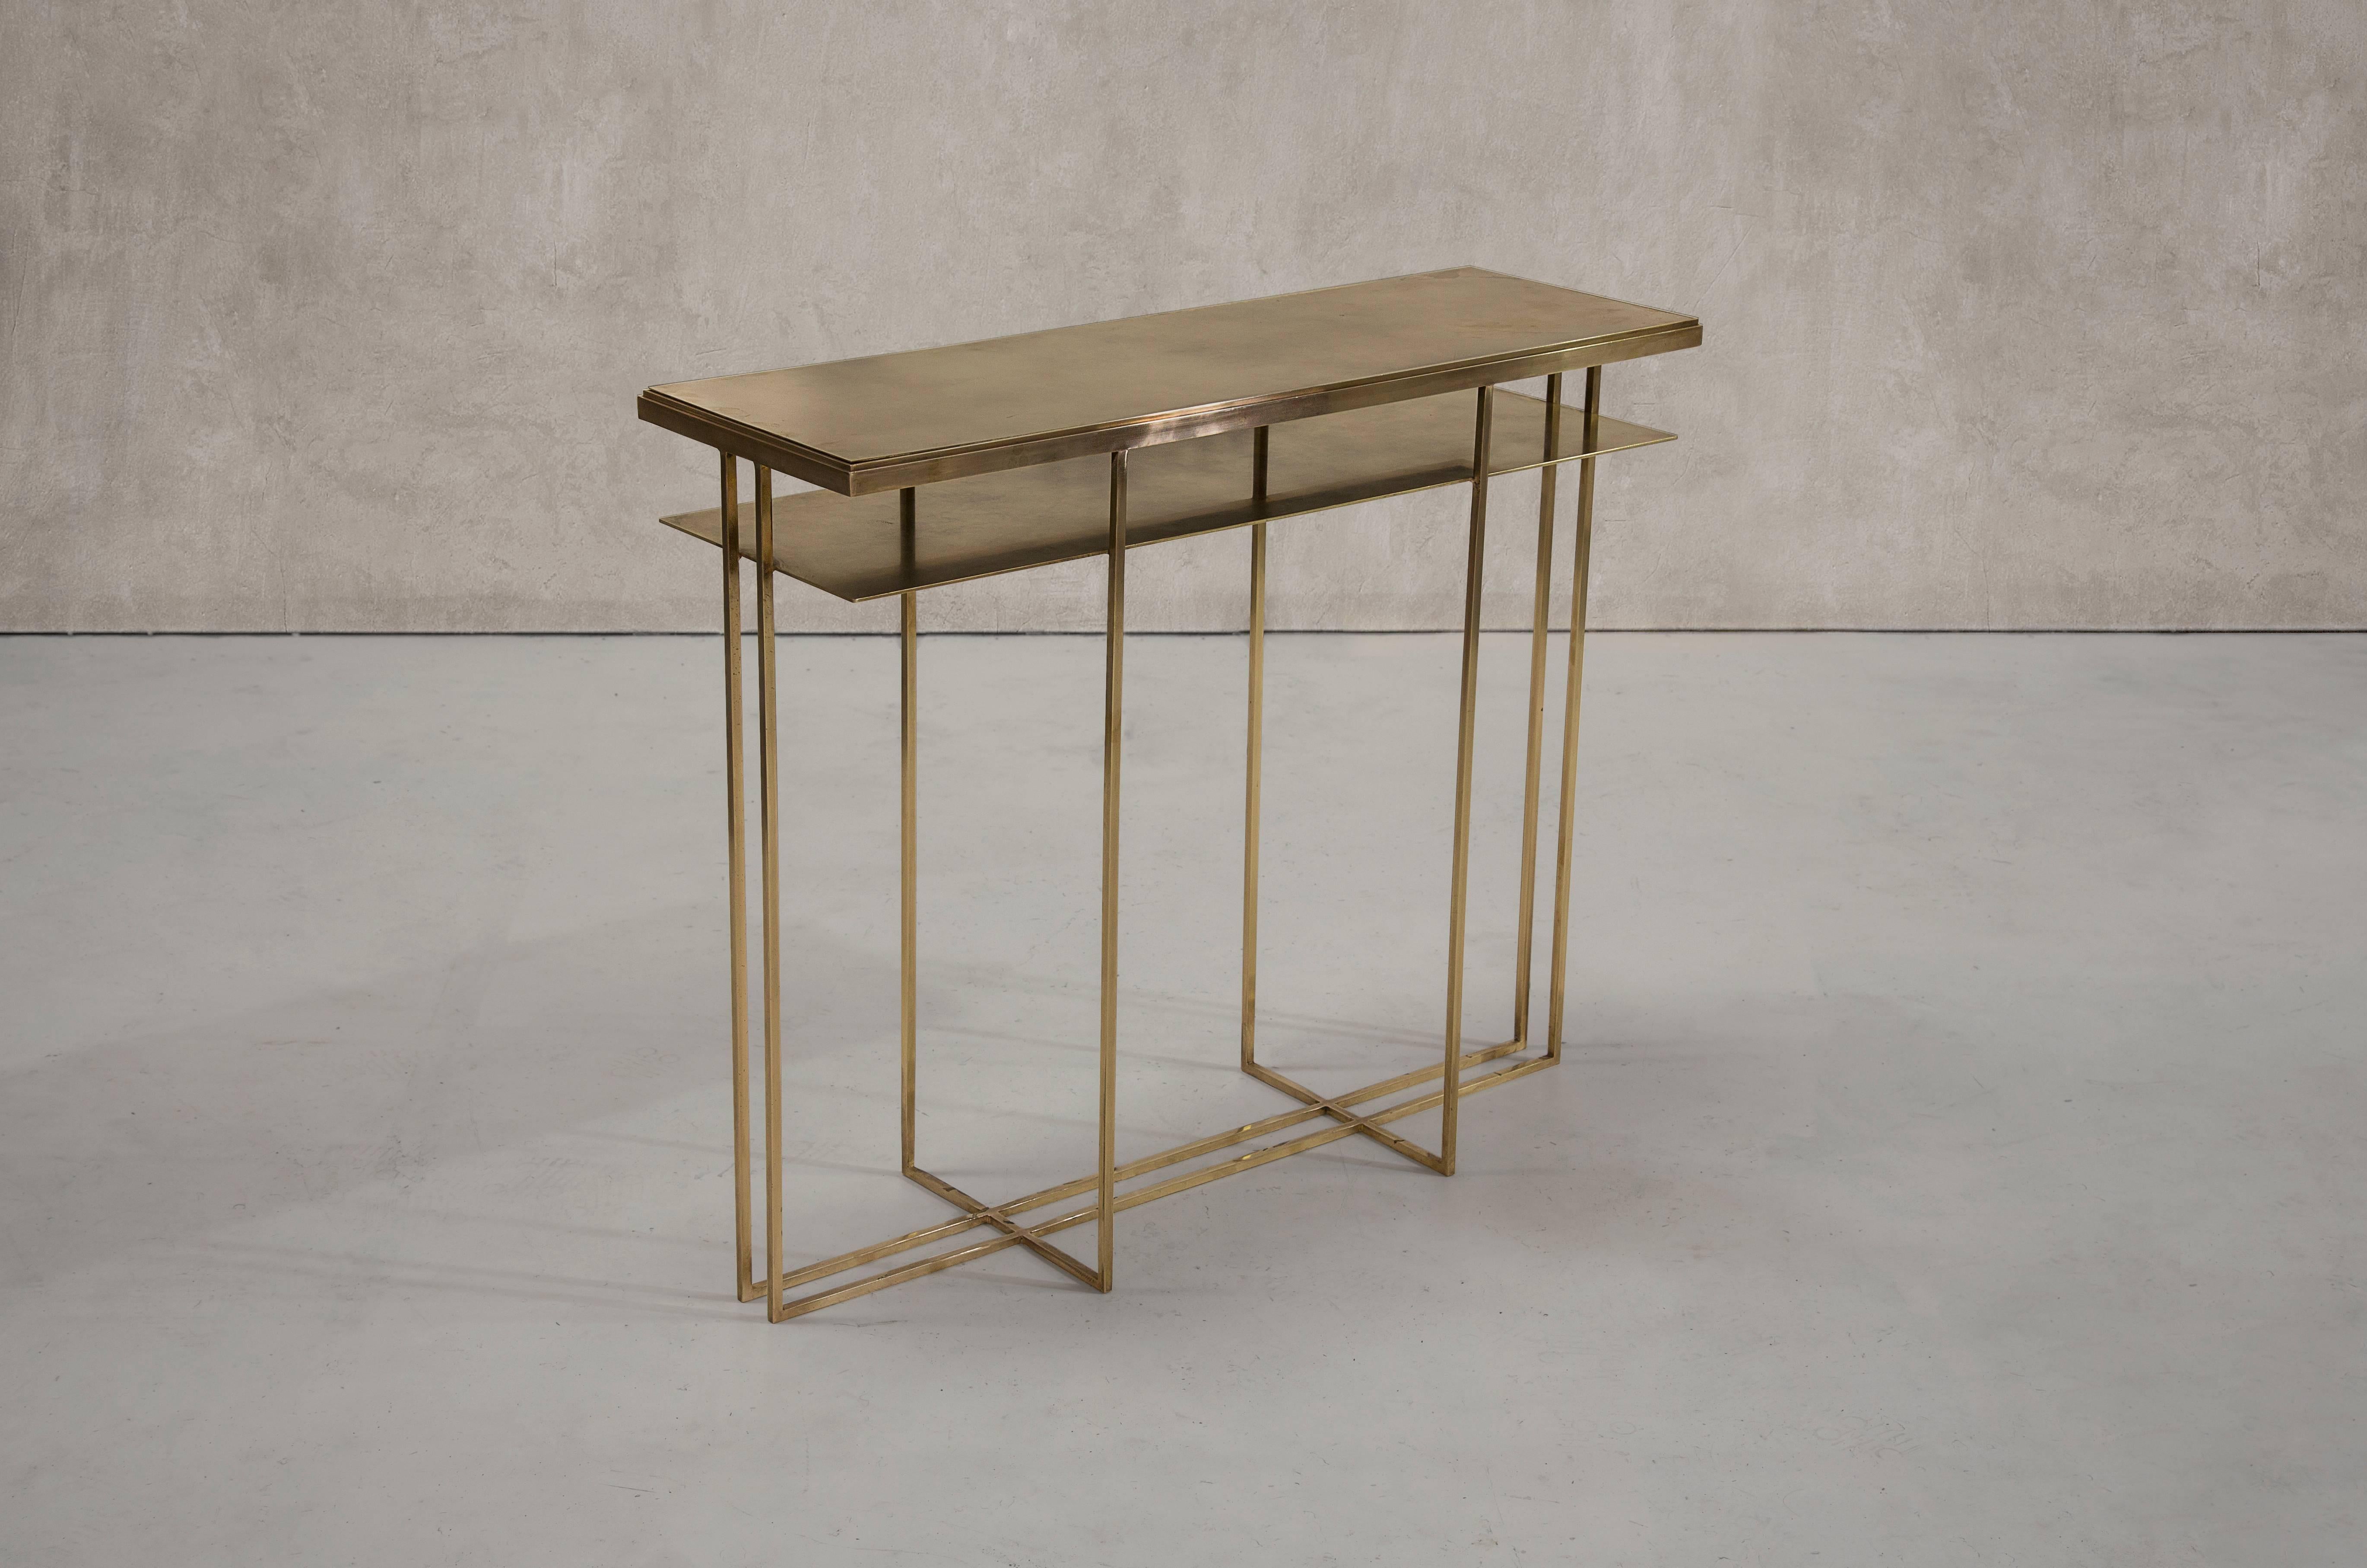 A console table in patinated brass. Hand crafted to order in the North. Bespoke finishes and sizes are available.

Measures: 120cm (length) x 25cm (width) x 80cm (height). 
Custom sizes available.

Made to order in 12 weeks.
Price excludes VAT.